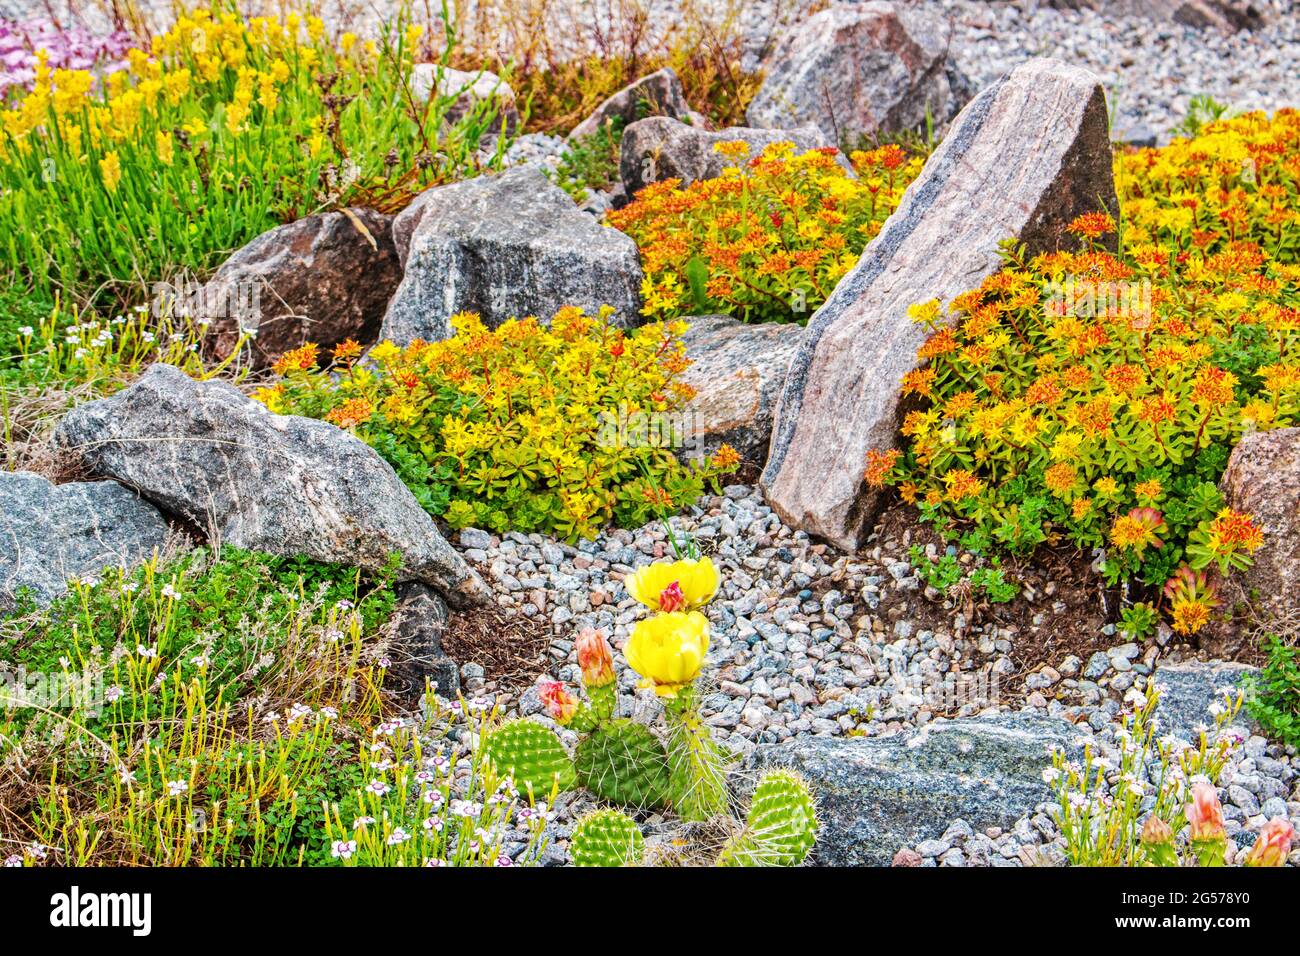 Hardy and cold tolerant succulent plants thrive in northern Ontario rock garden Stock Photo